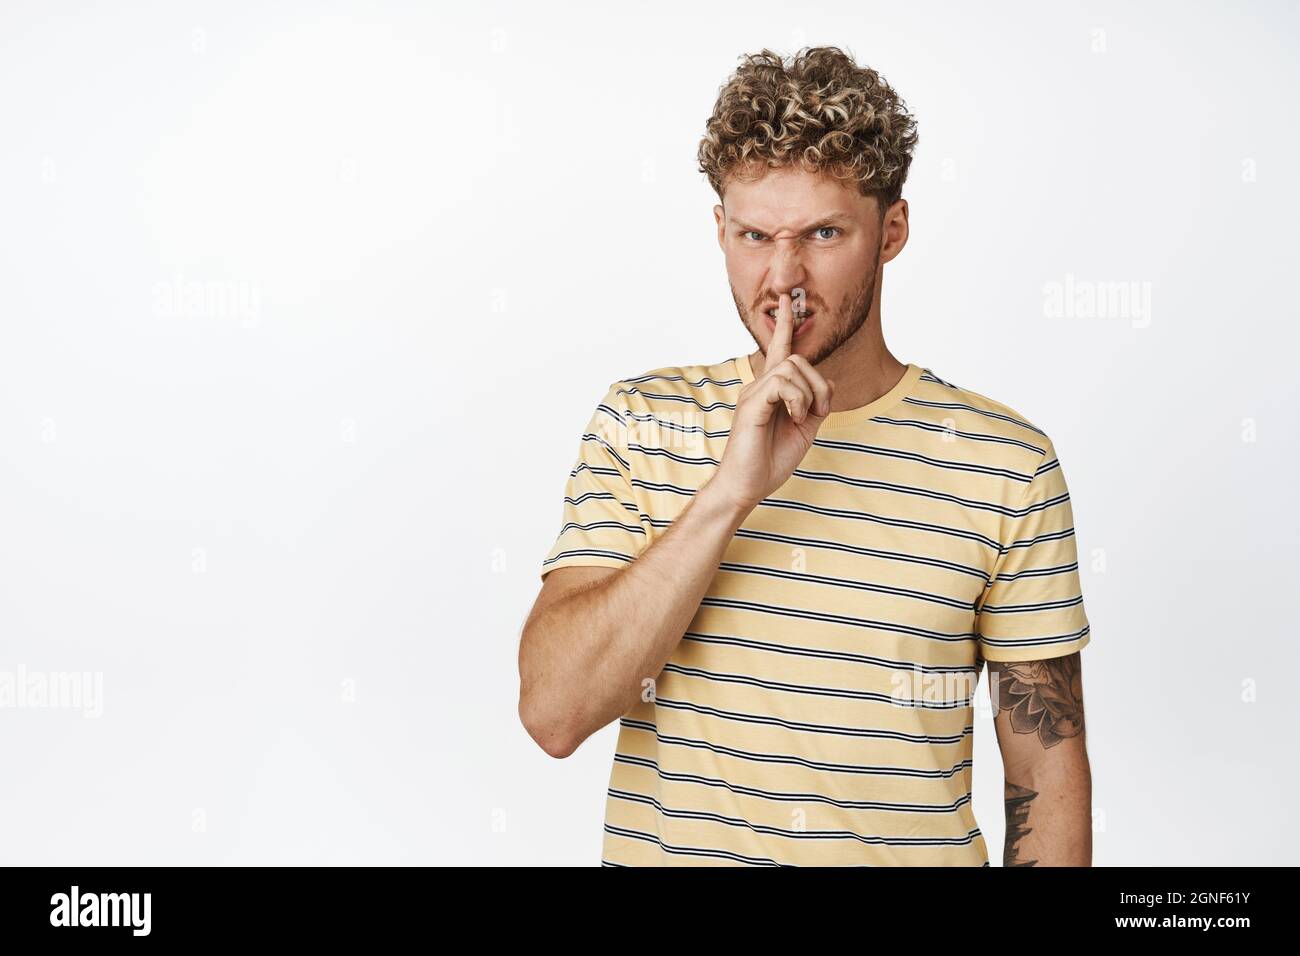 Blond guy grimacing angry and shushing, making hush gesture, telling to be quiet, shut up, dont speak sign, standing over white background Stock Photo